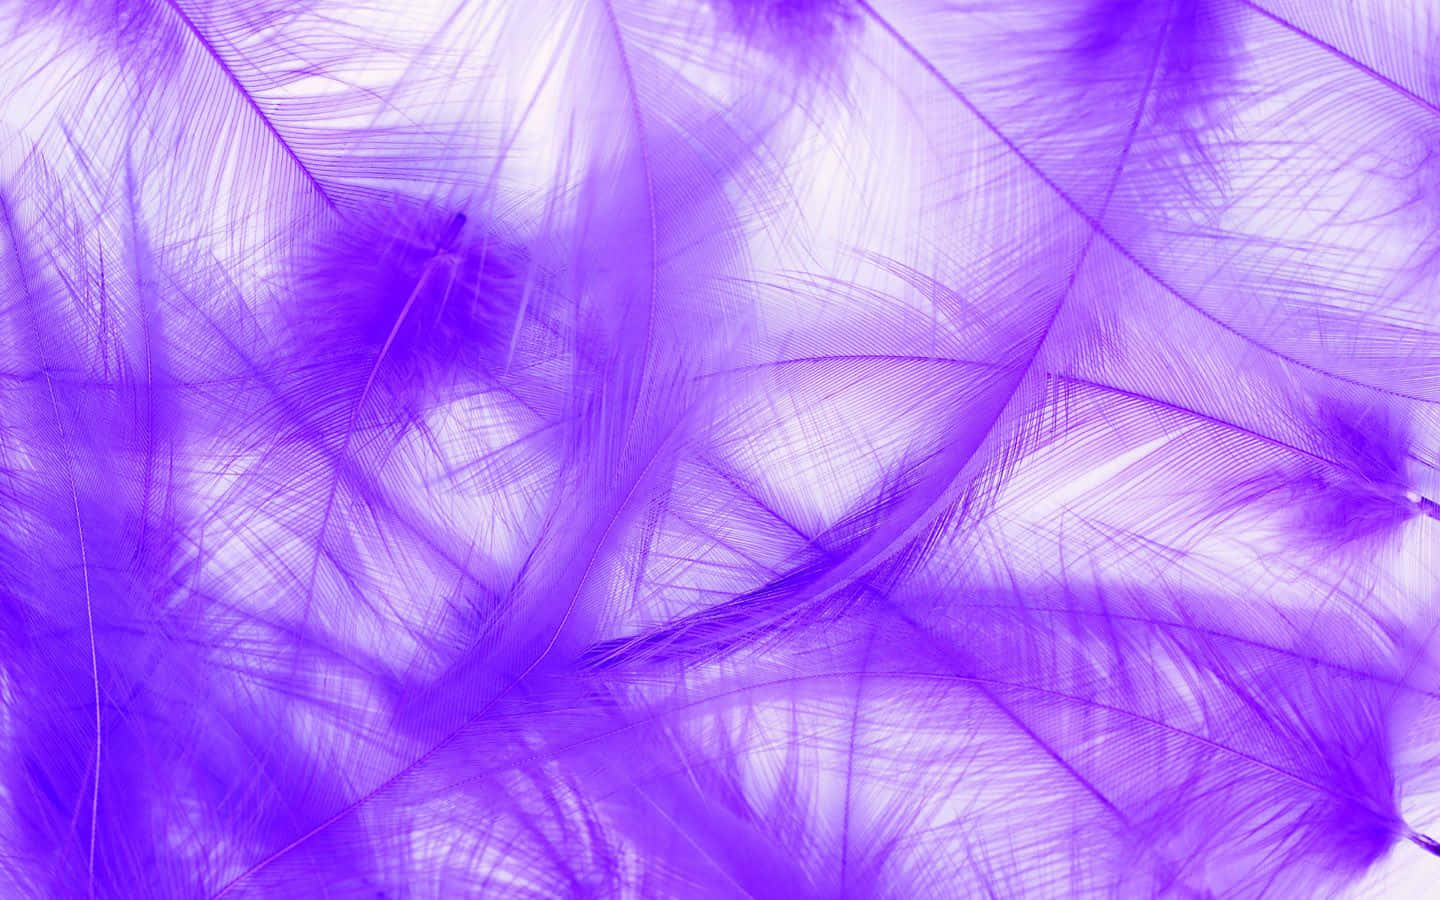 A majestic display of vivid purple feathers Wallpaper